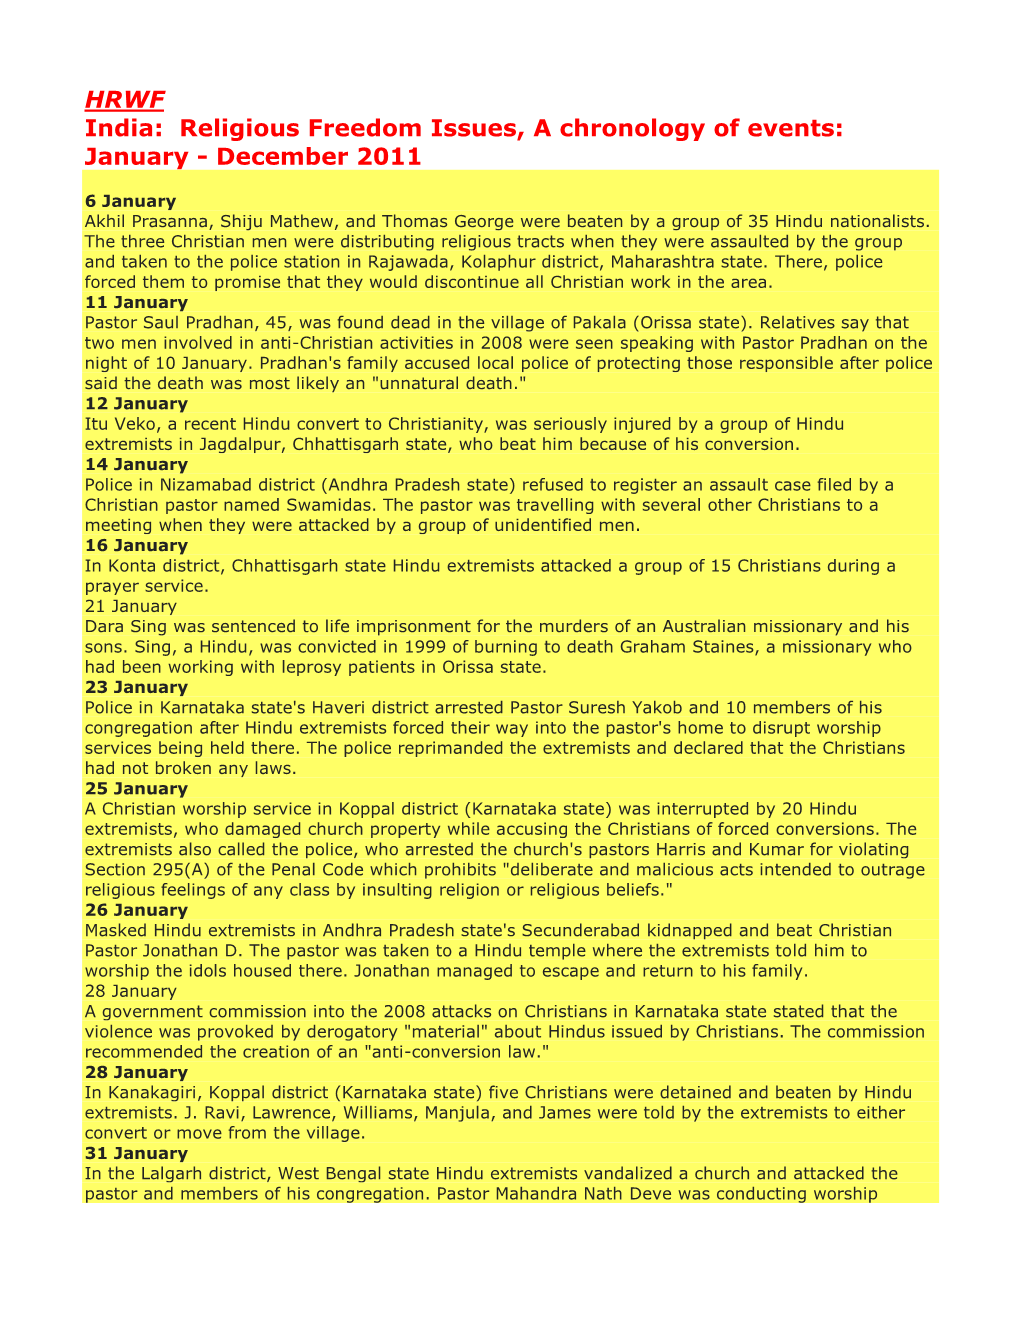 HRWF India: Religious Freedom Issues, a Chronology of Events: January - December 2011